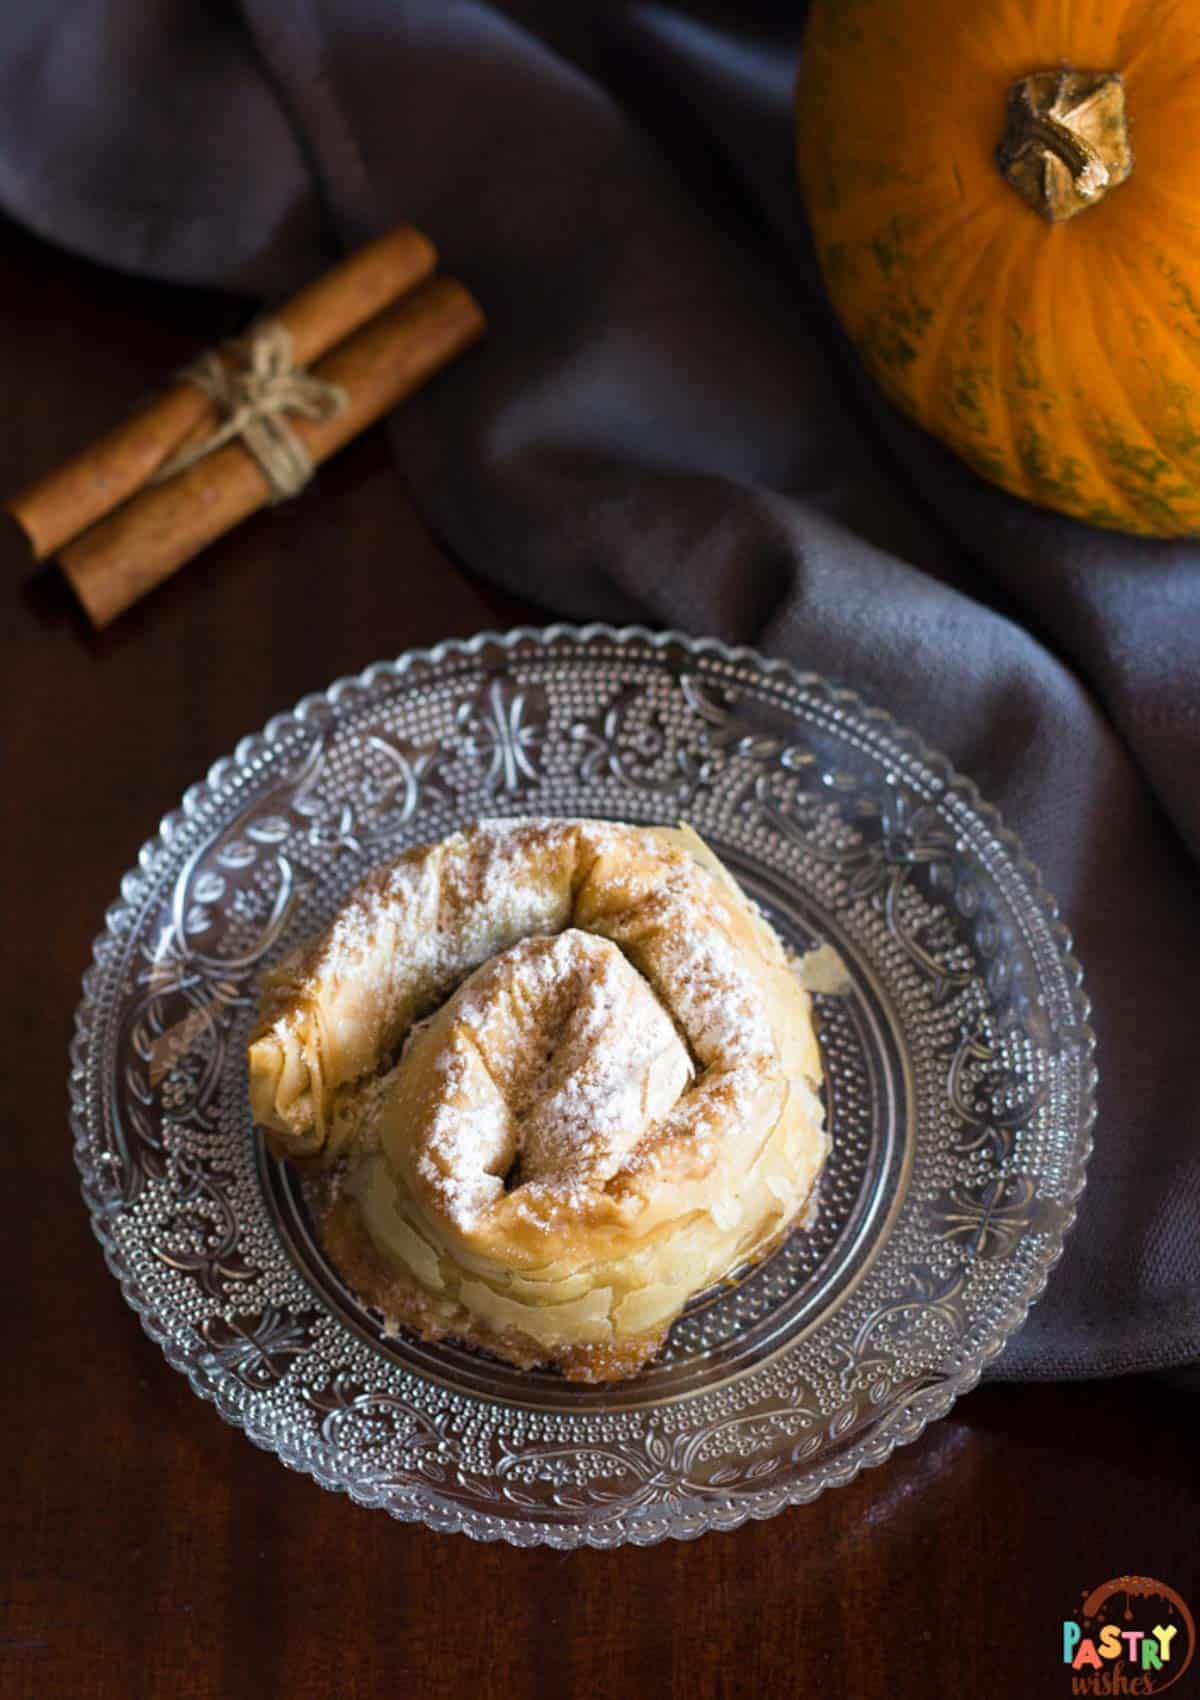 a dimly lit tablescape with a spiral phyllo hand pie on a plate and a pumpkin in the background.